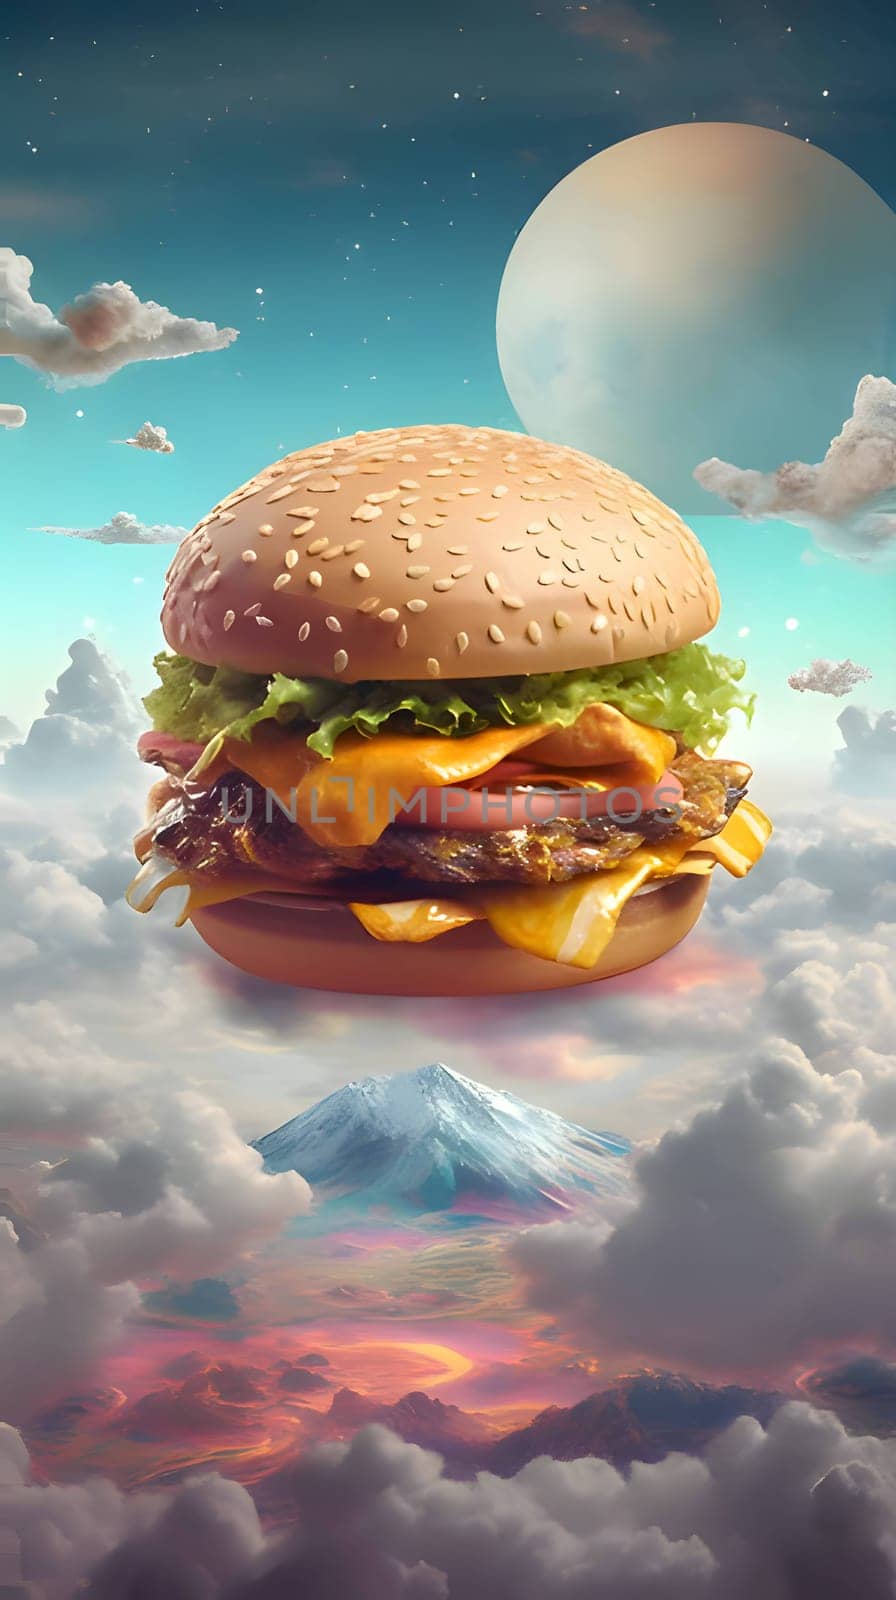 Abstract Illustration: A delectable hamburger floats against a captivating sky, forming a visually enticing composition that stimulates the senses.